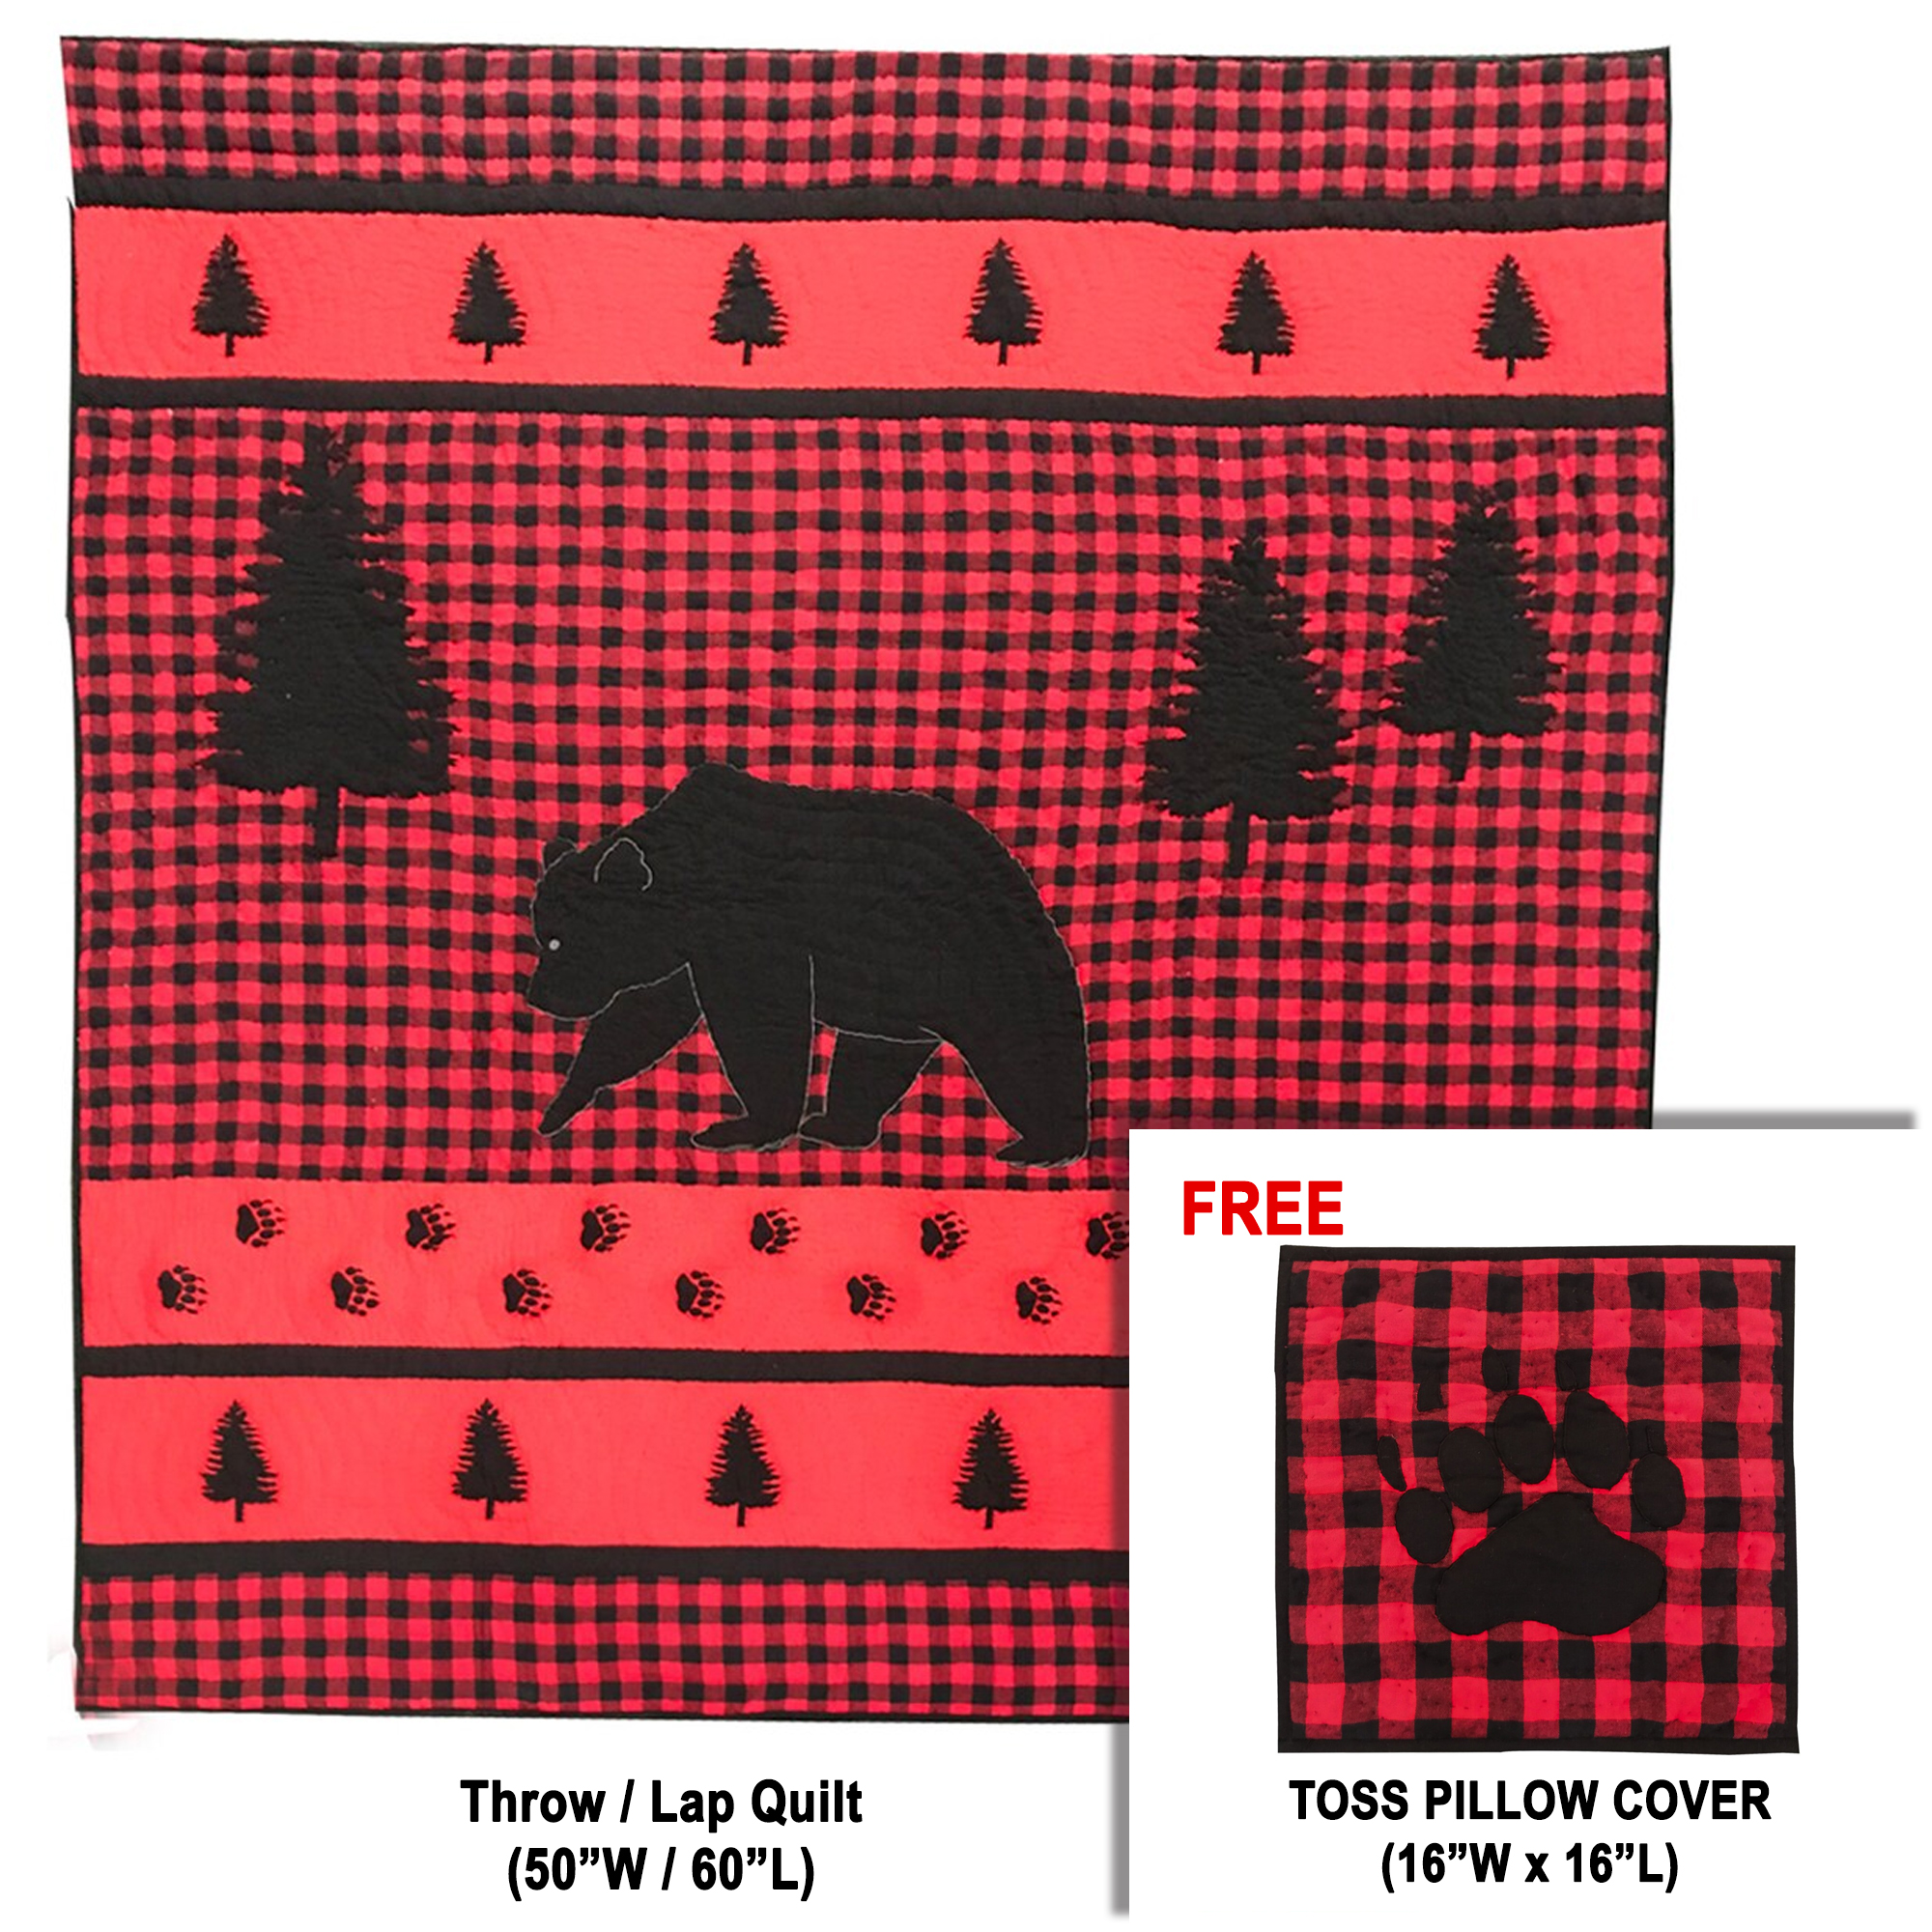 Bear Track Throw 50"W x 60"L | Buy a Throw / lap Quilt and Get a matching Toss Pillow Cover (16"W x 16"L) FREE